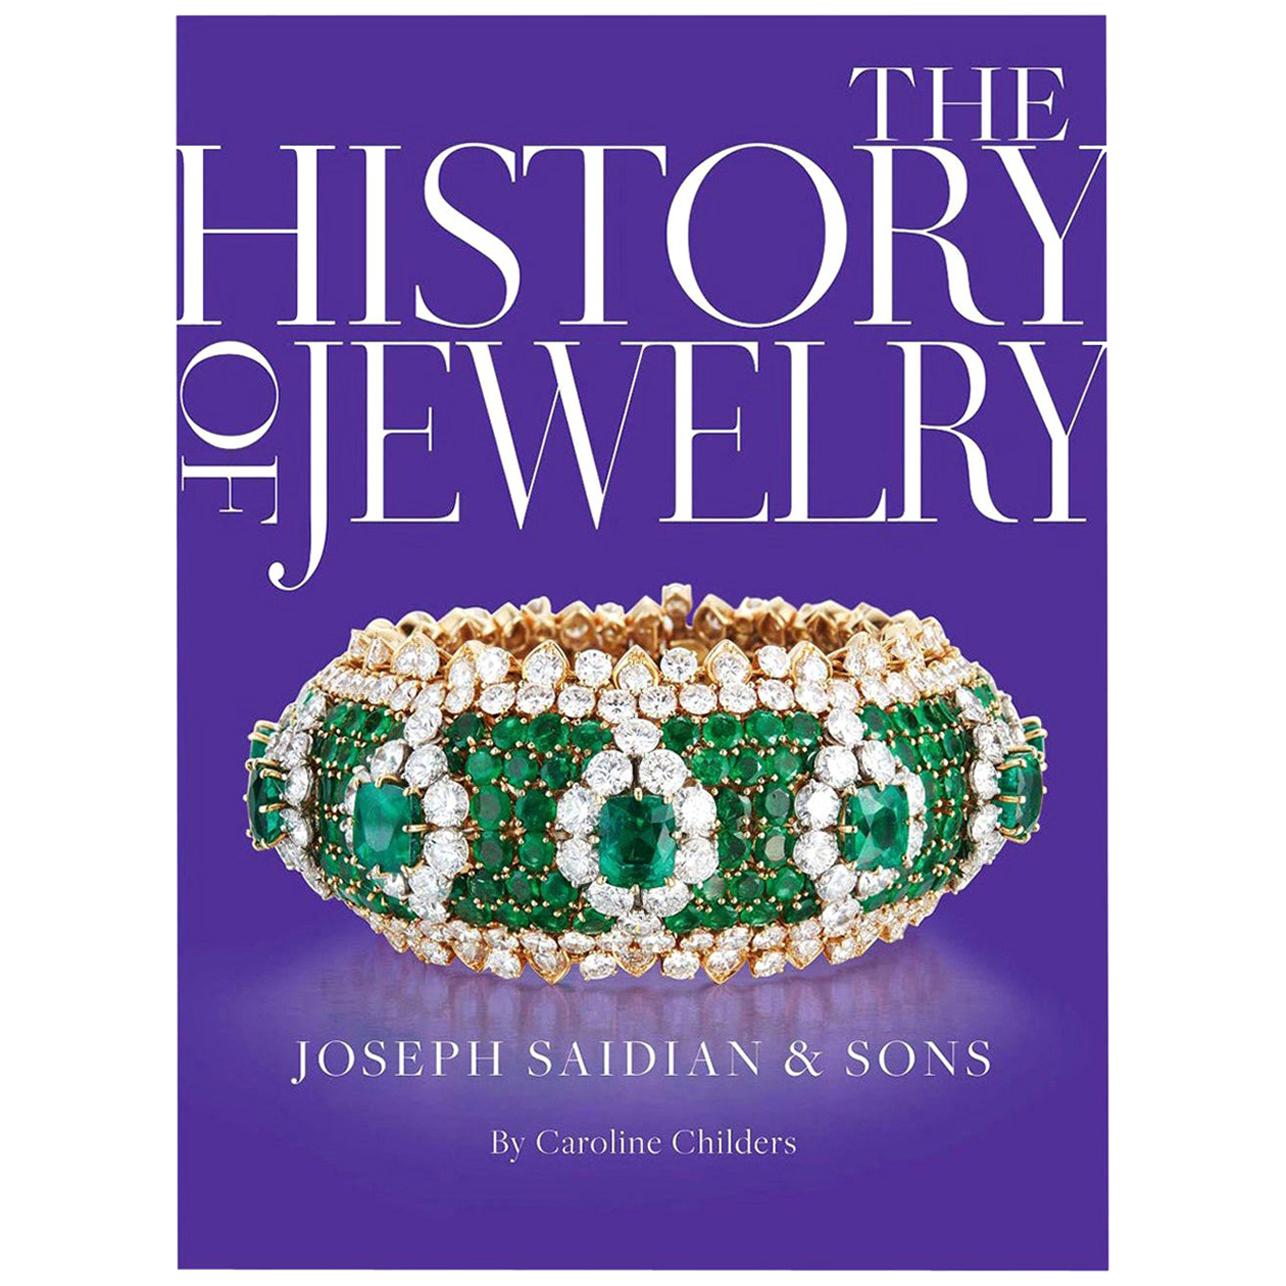 "The History of Jewelry" Published by Rizzoli